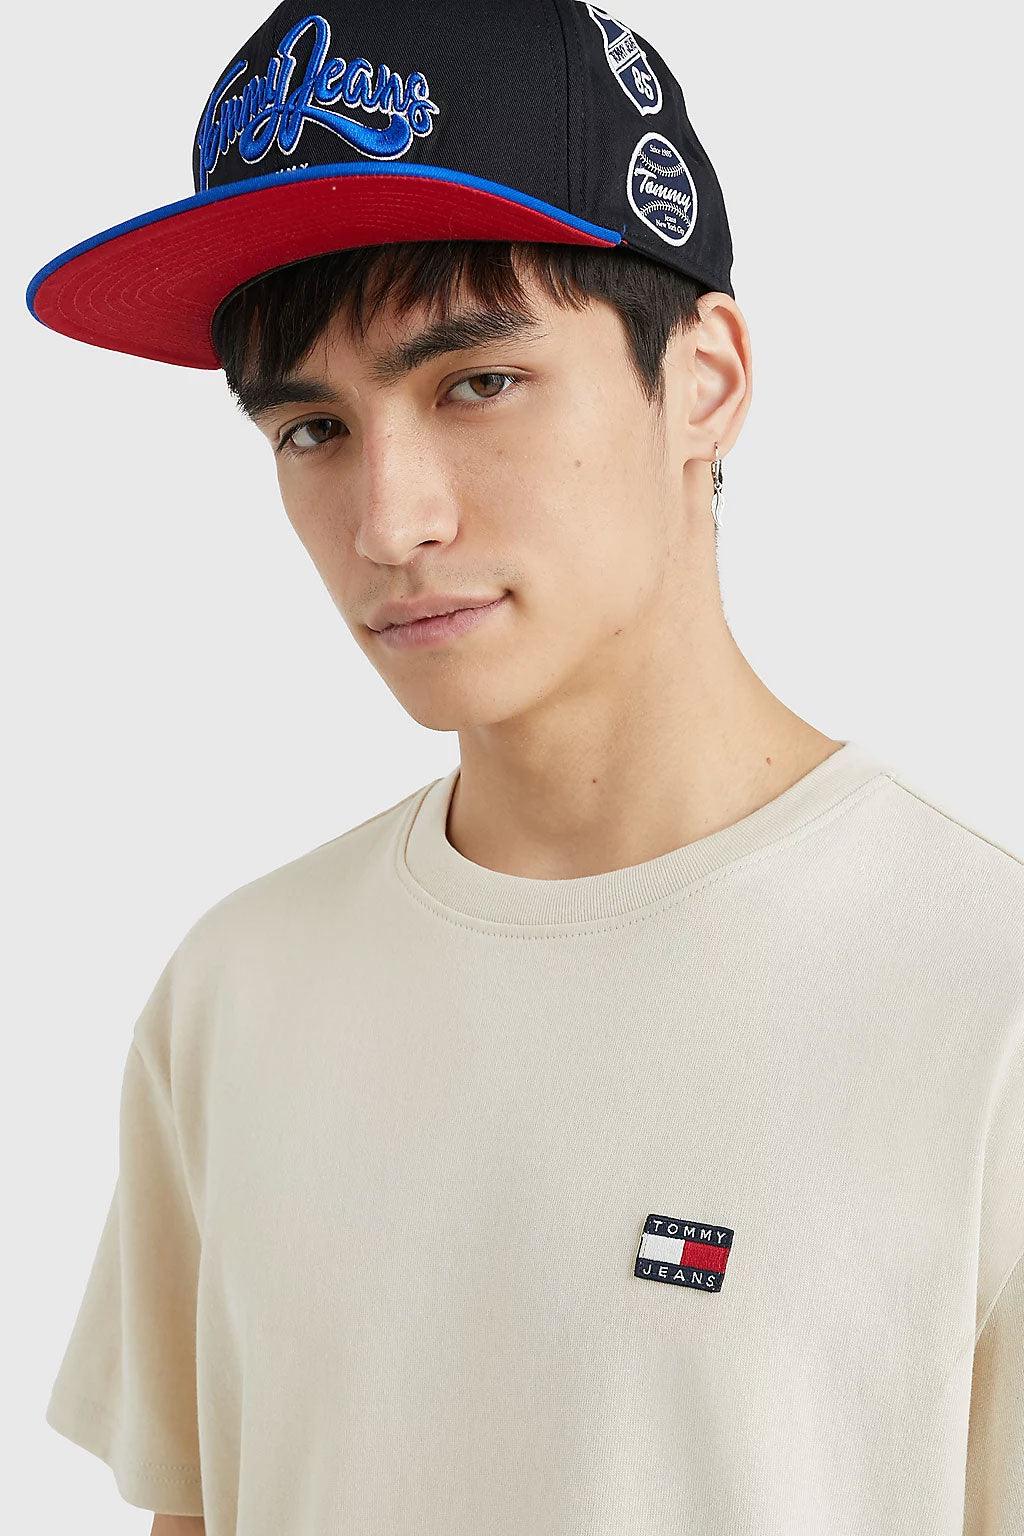 Tommy Jeans t-shirt | Big Boss | the menswear concept